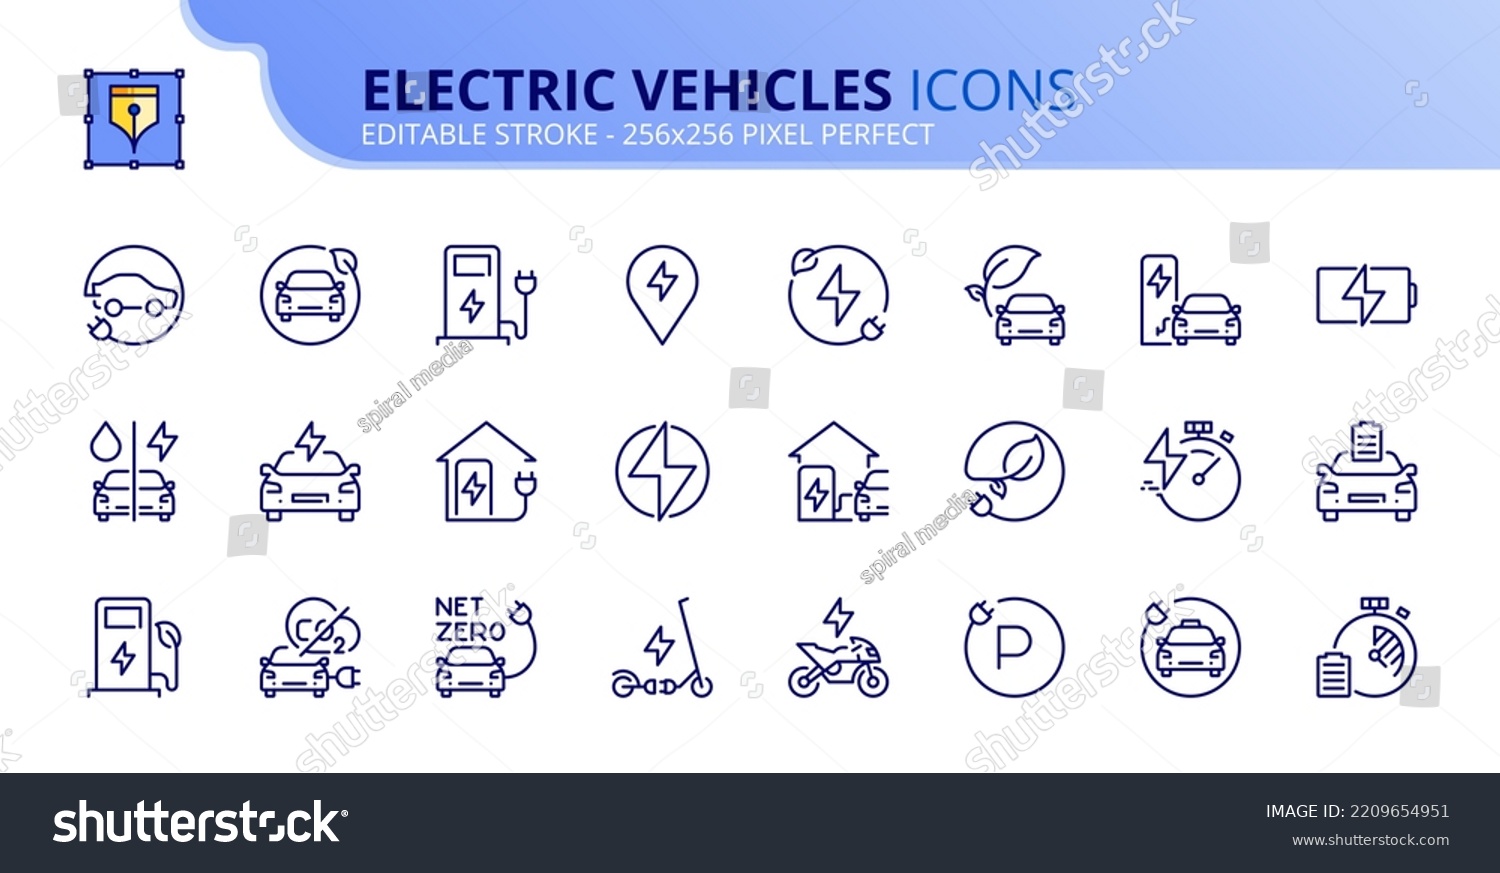 SVG of Line icons about electric vehicles. Sustainable development Contains such icons as electric car, motorbike, scooter, battery and charging station. Editable stroke Vector 256x256 pixel perfect svg